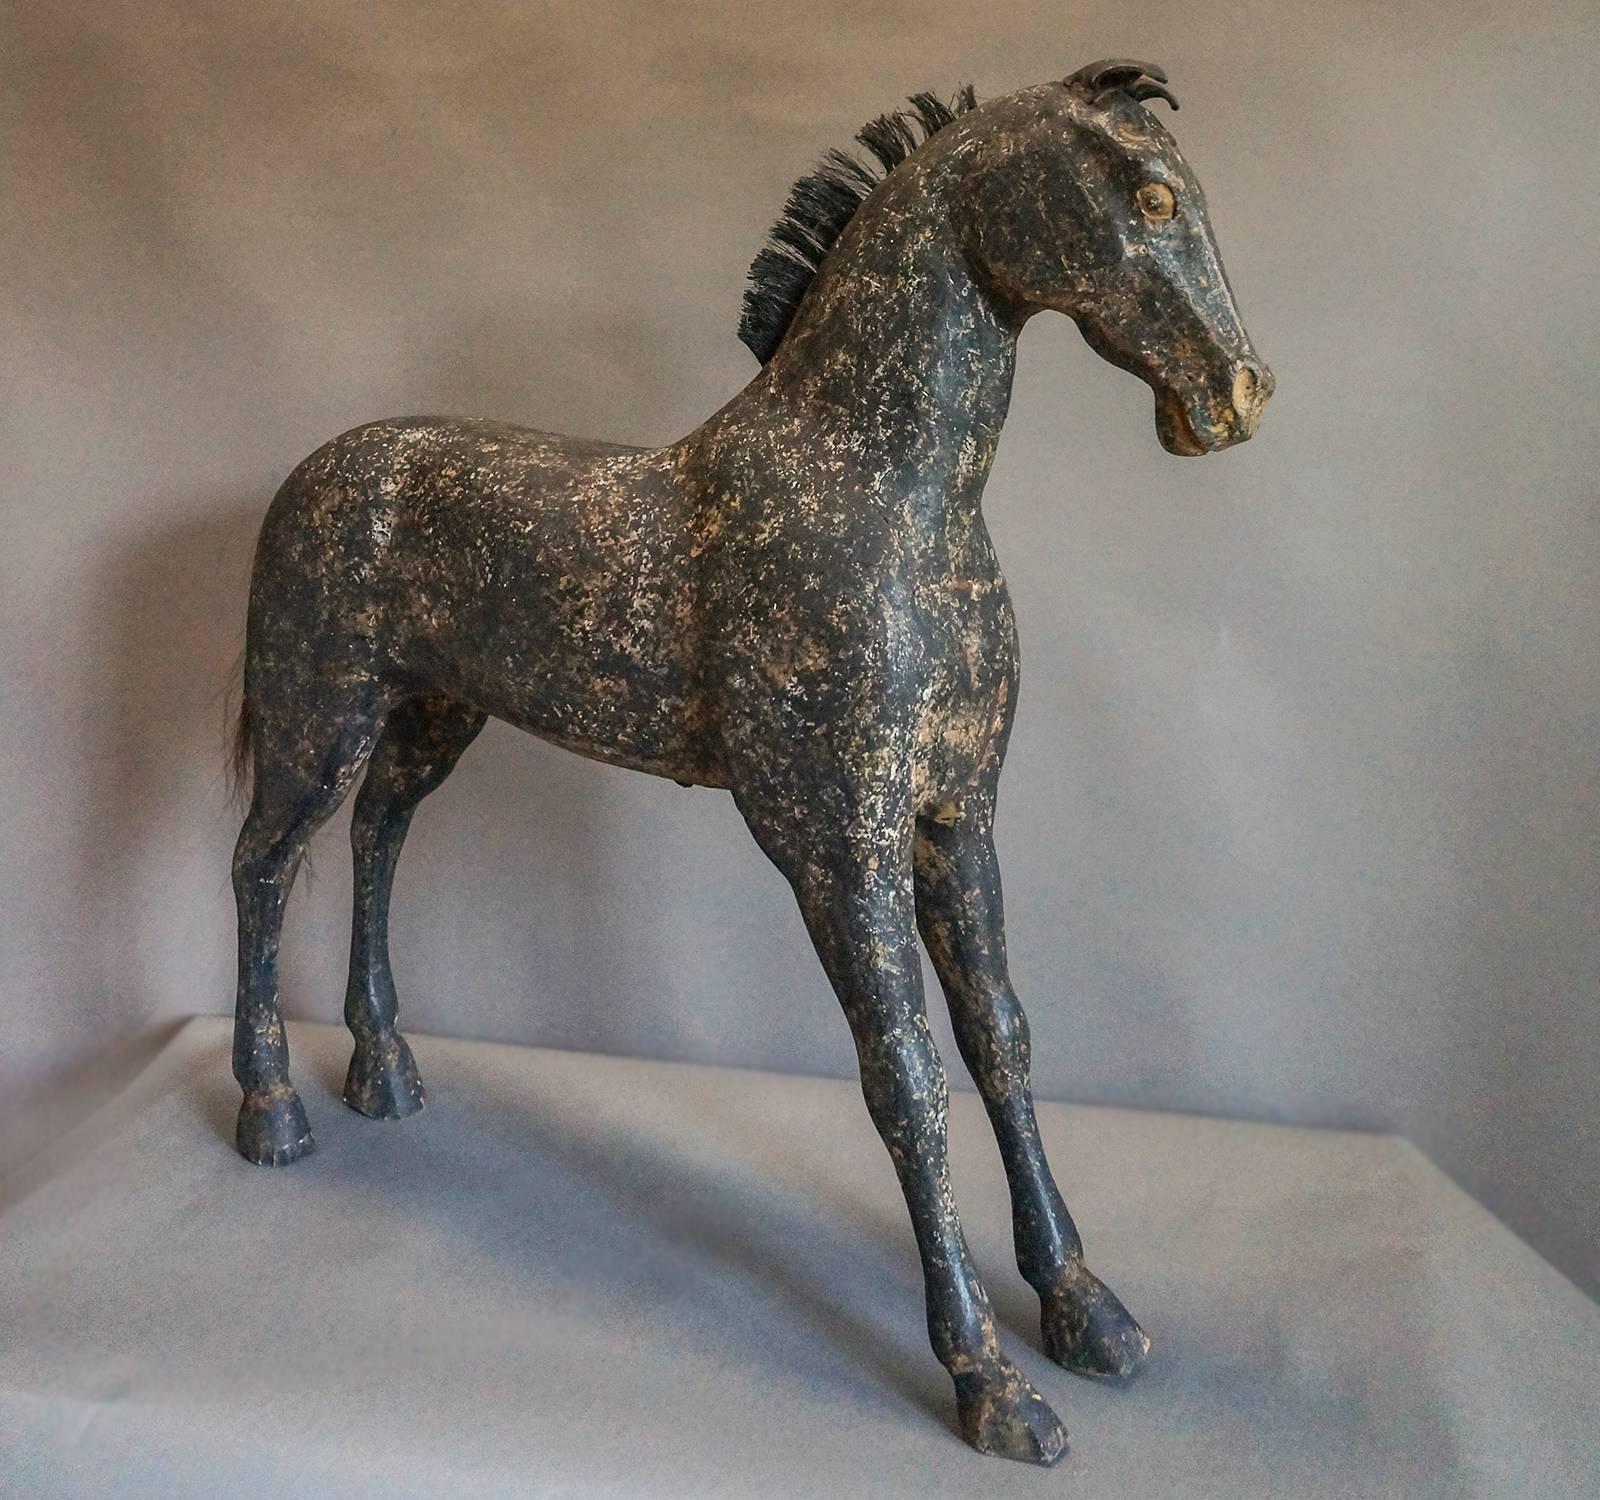 Large toy horse, Sweden, circa 1860, with original painted surface. Black horse hair mane and tail and leather ears. Fine carving of the head and musculature.